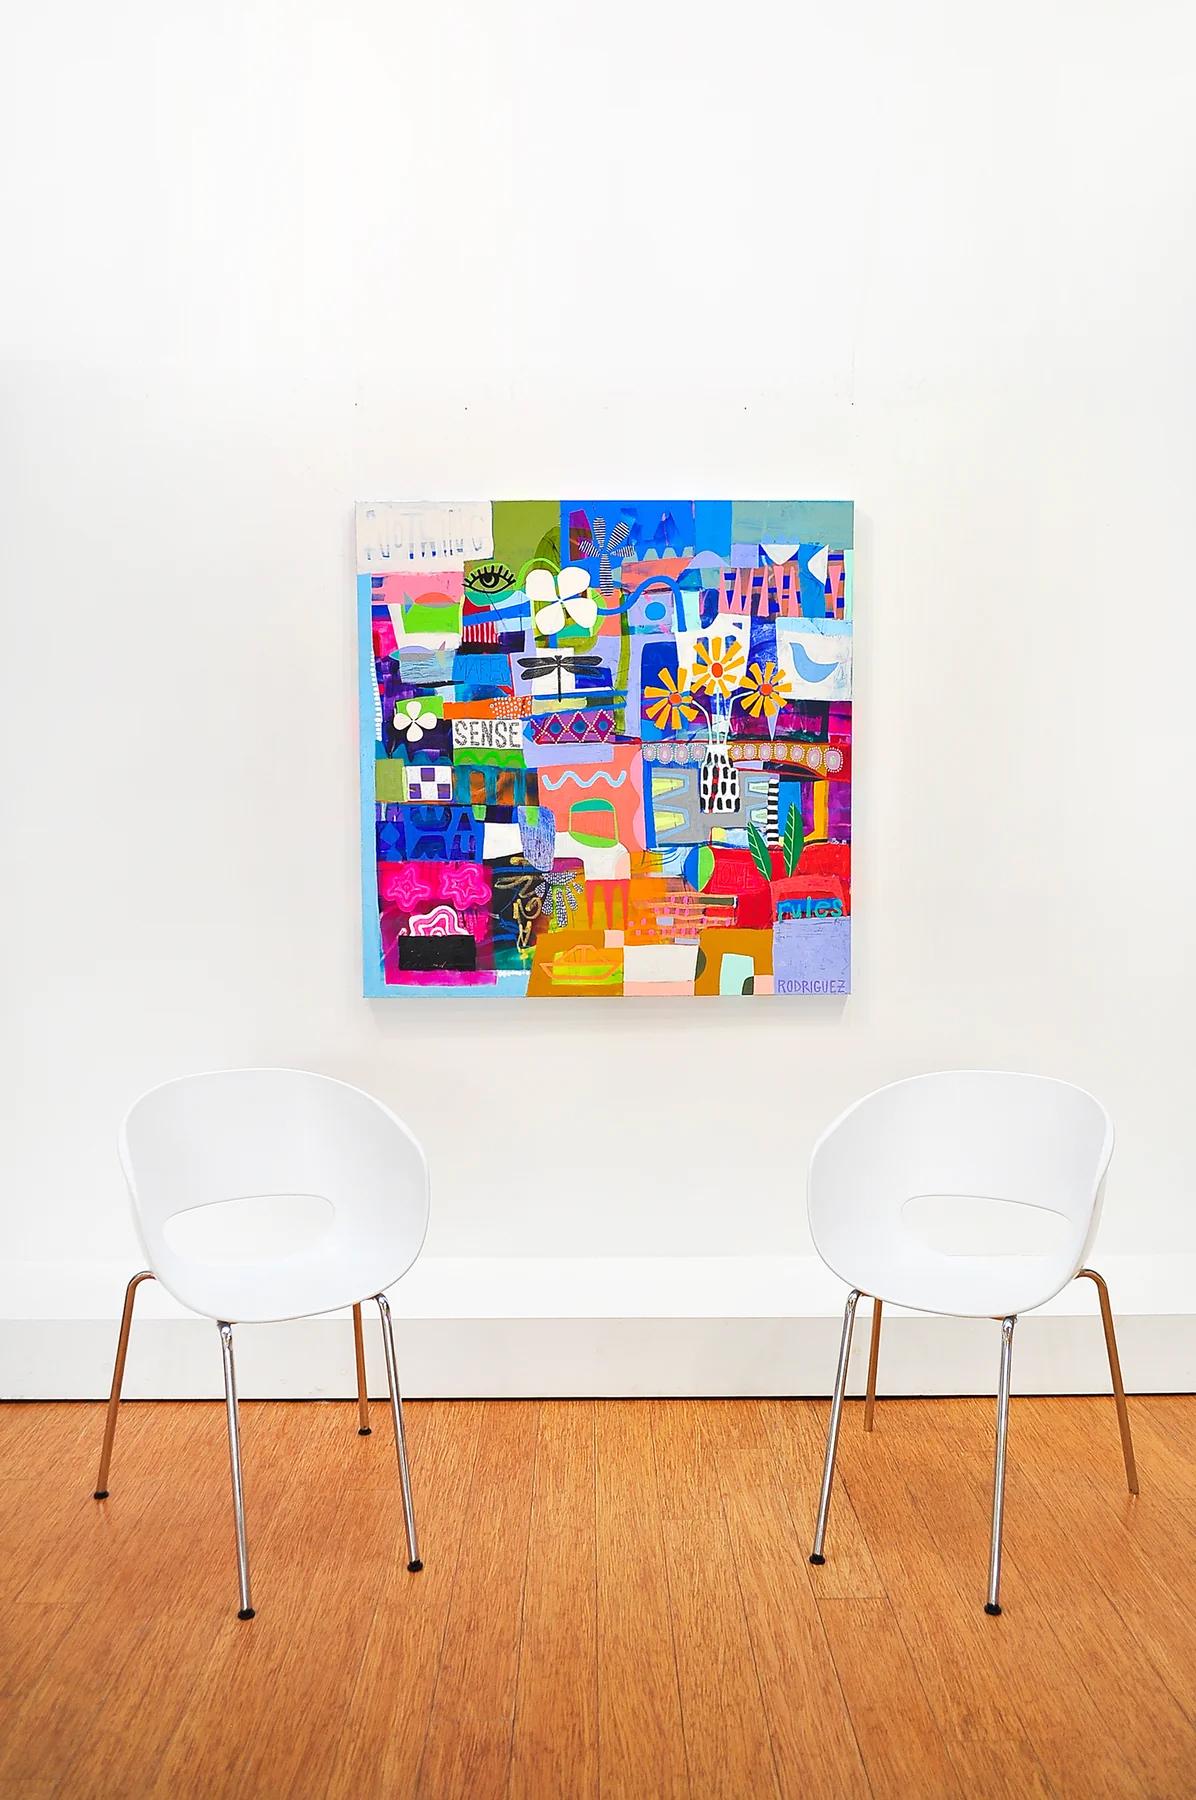 Still Love Rules - Abstract Painting by Marianne Angeli Rodriguez